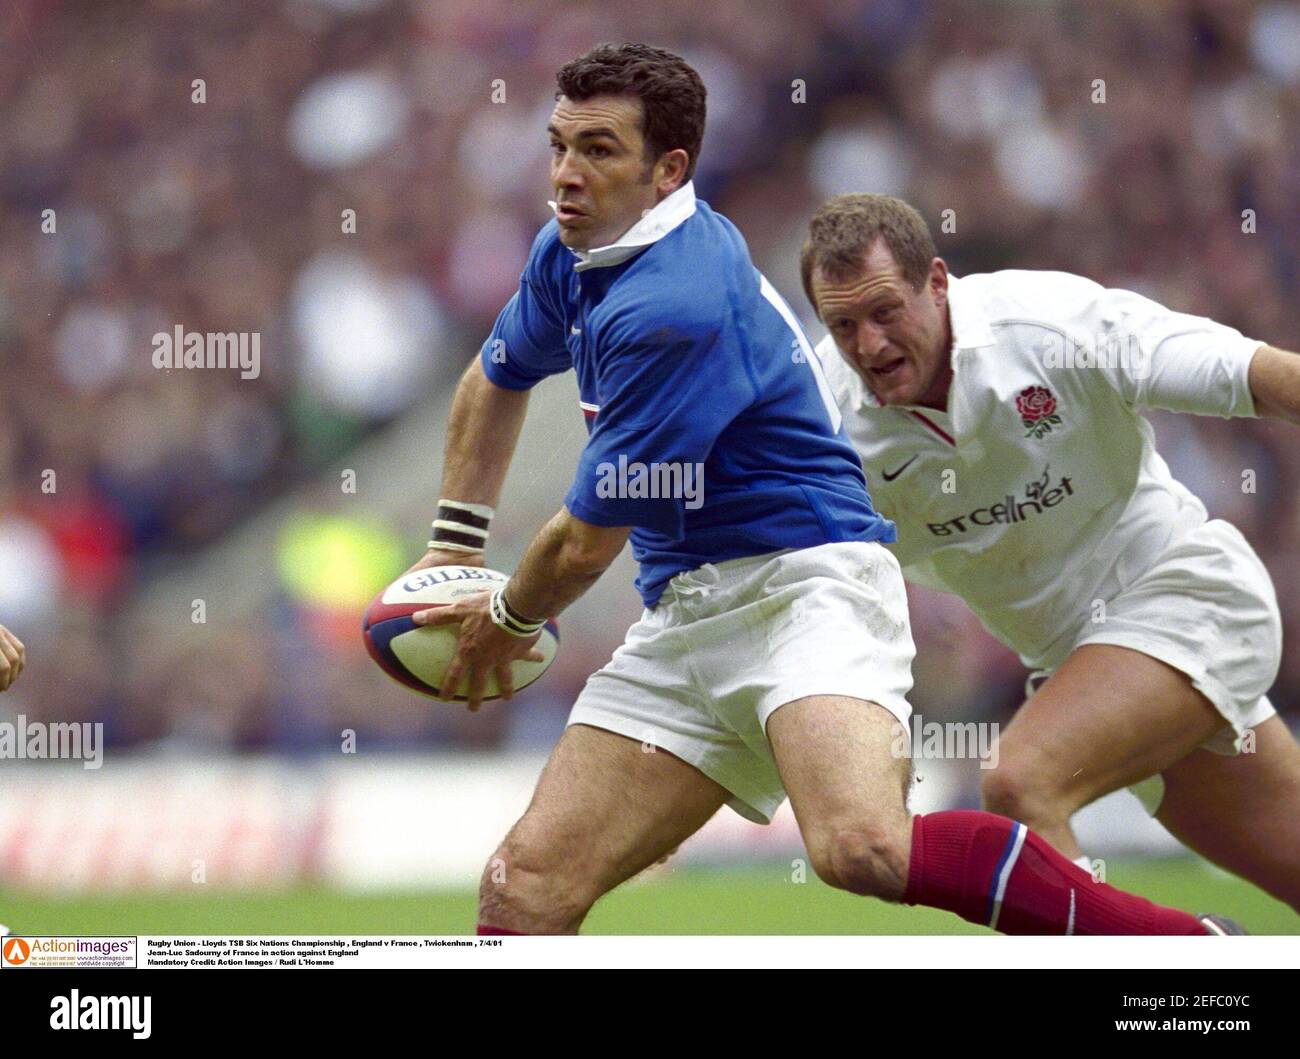 Rugby Union - Lloyds TSB Six Nations Championship , England v France ,  Twickenham , 7/4/01 Jean-Luc Sadourny of France in action against England  Mandatory Credit: Action Images / Rudi L'Homme Stock Photo - Alamy